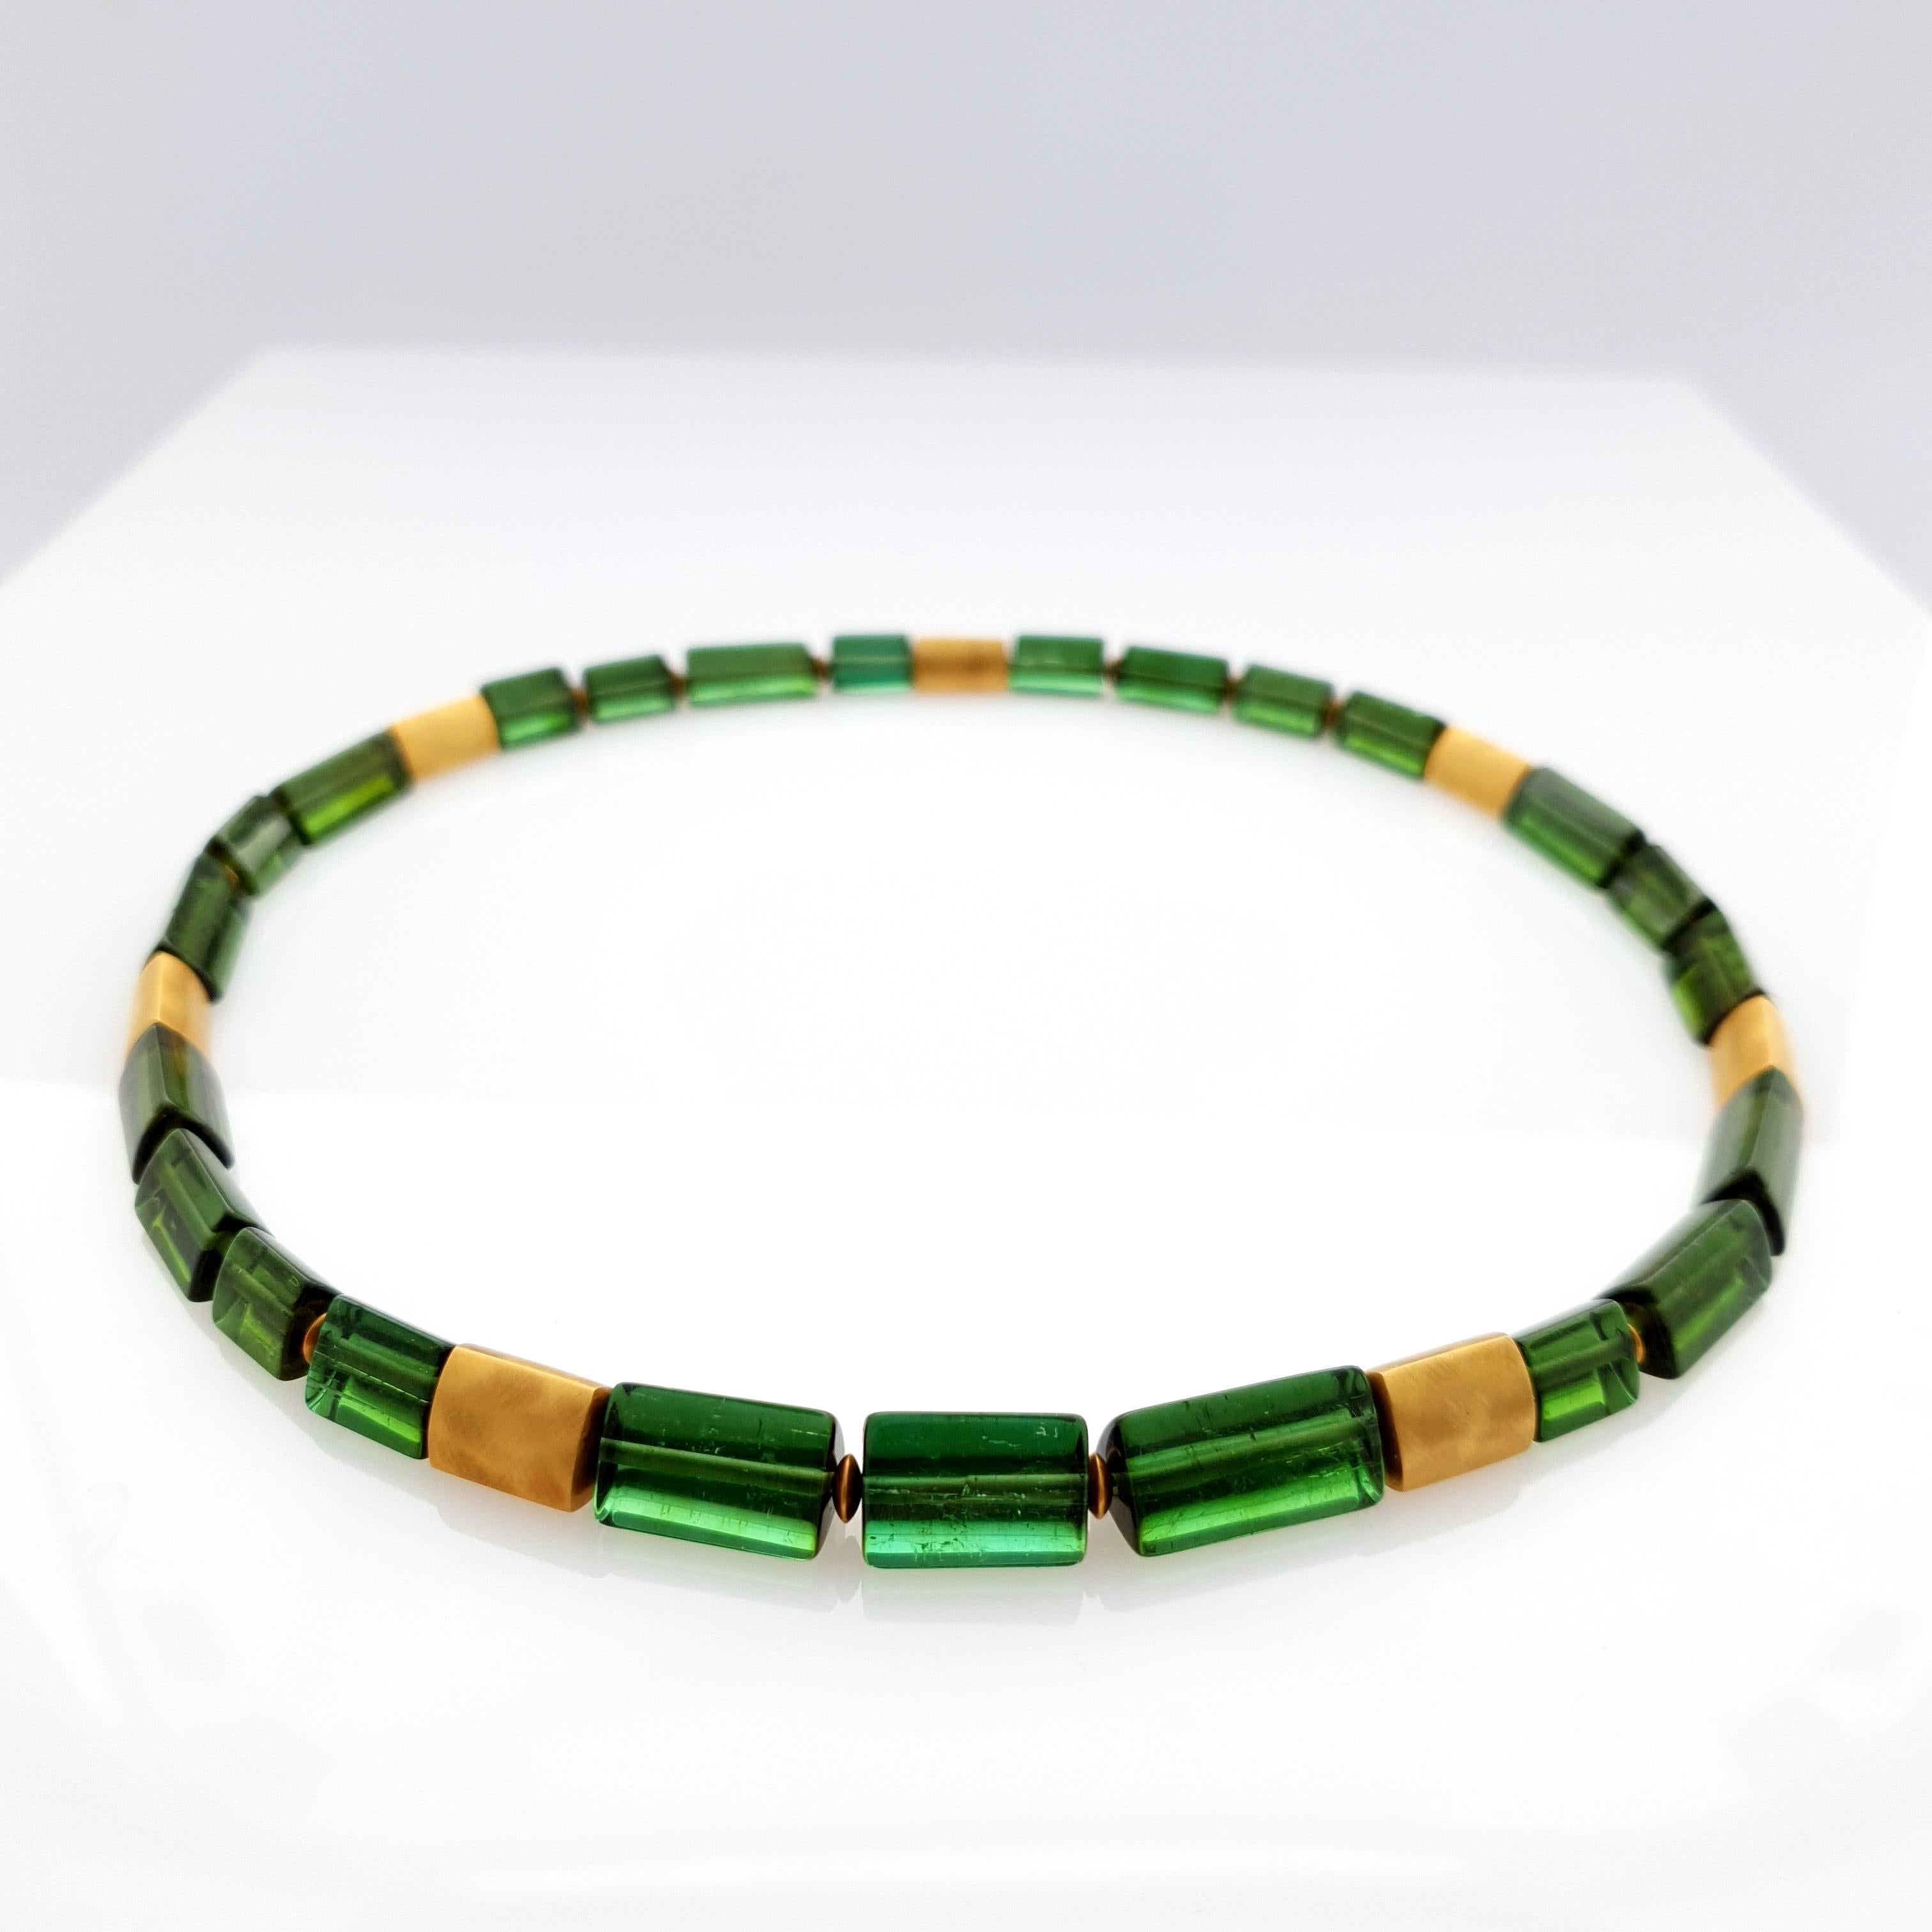 This Natural Green Tourmaline Crystal Beaded Necklace with 18 Carat mat yellow Gold is totally handmade. Cutting as well as goldwork are made in German quality. The screw clasp is easy to handle and very secure. Triangular gold clasp and beads